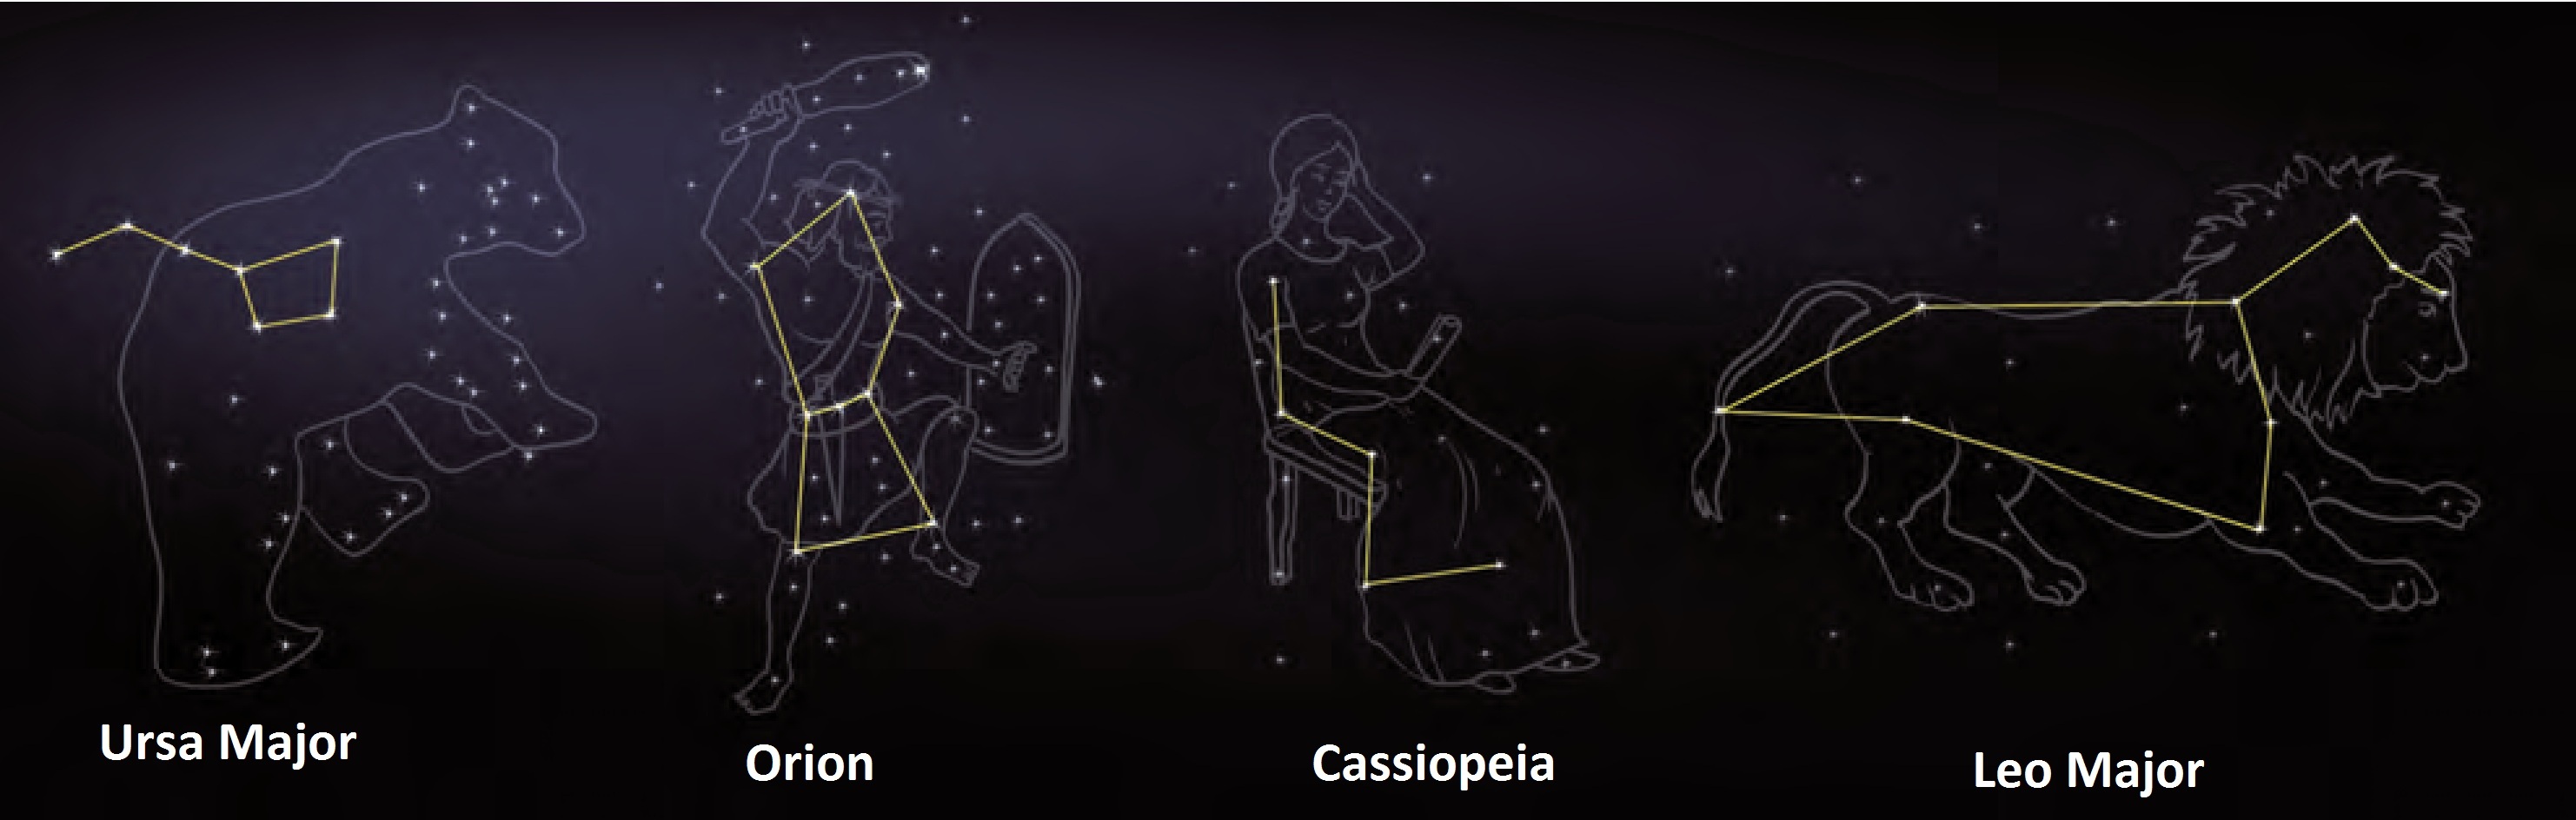 constellations-definition-and-examples-of-different-constellations